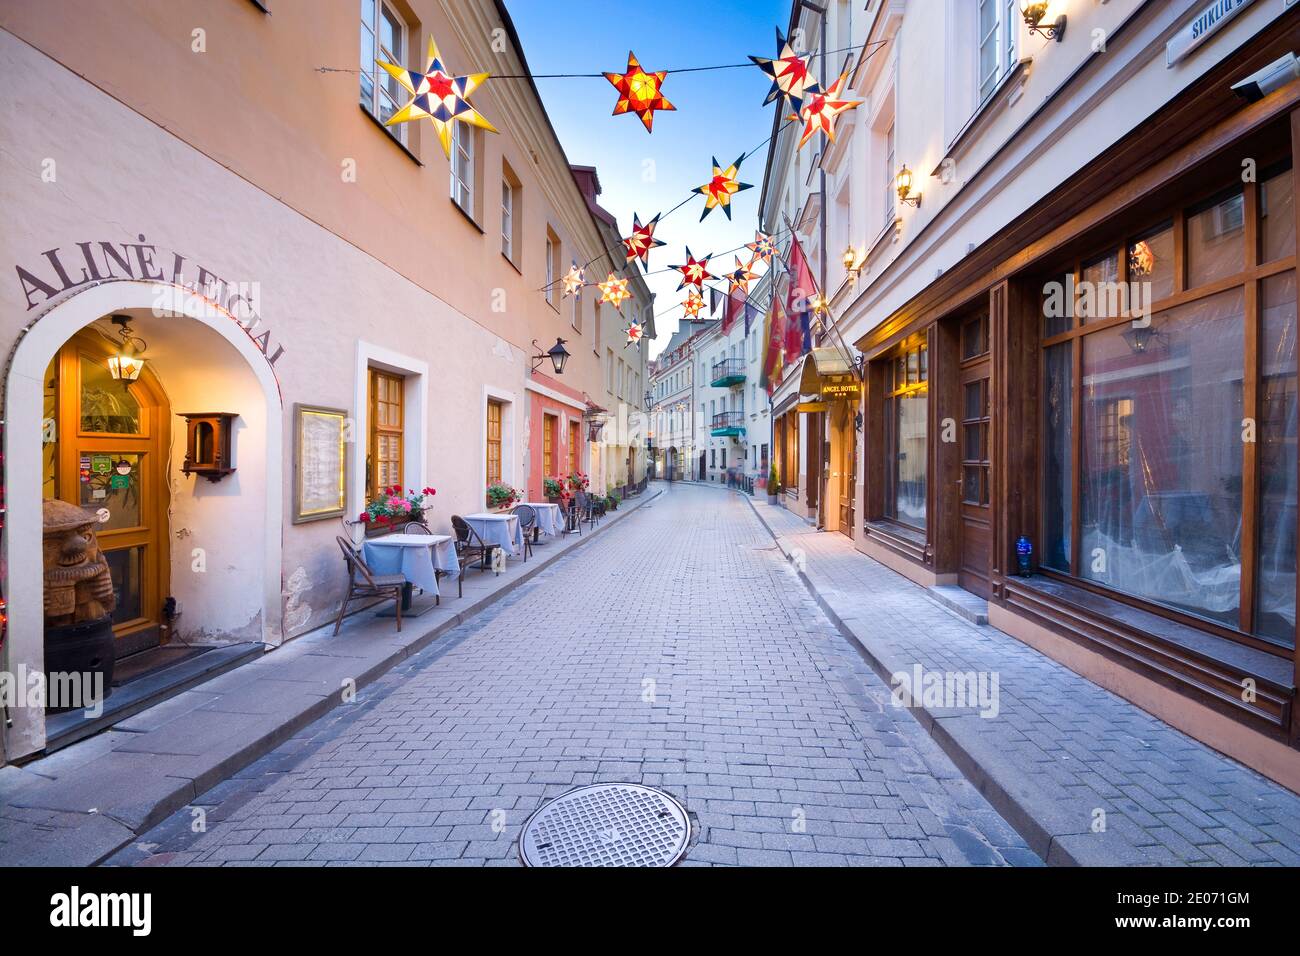 Night view of illuminated Stikliai Street in Jewish quarter of the Old Town of Vilnius, Lithuania. Stock Photo